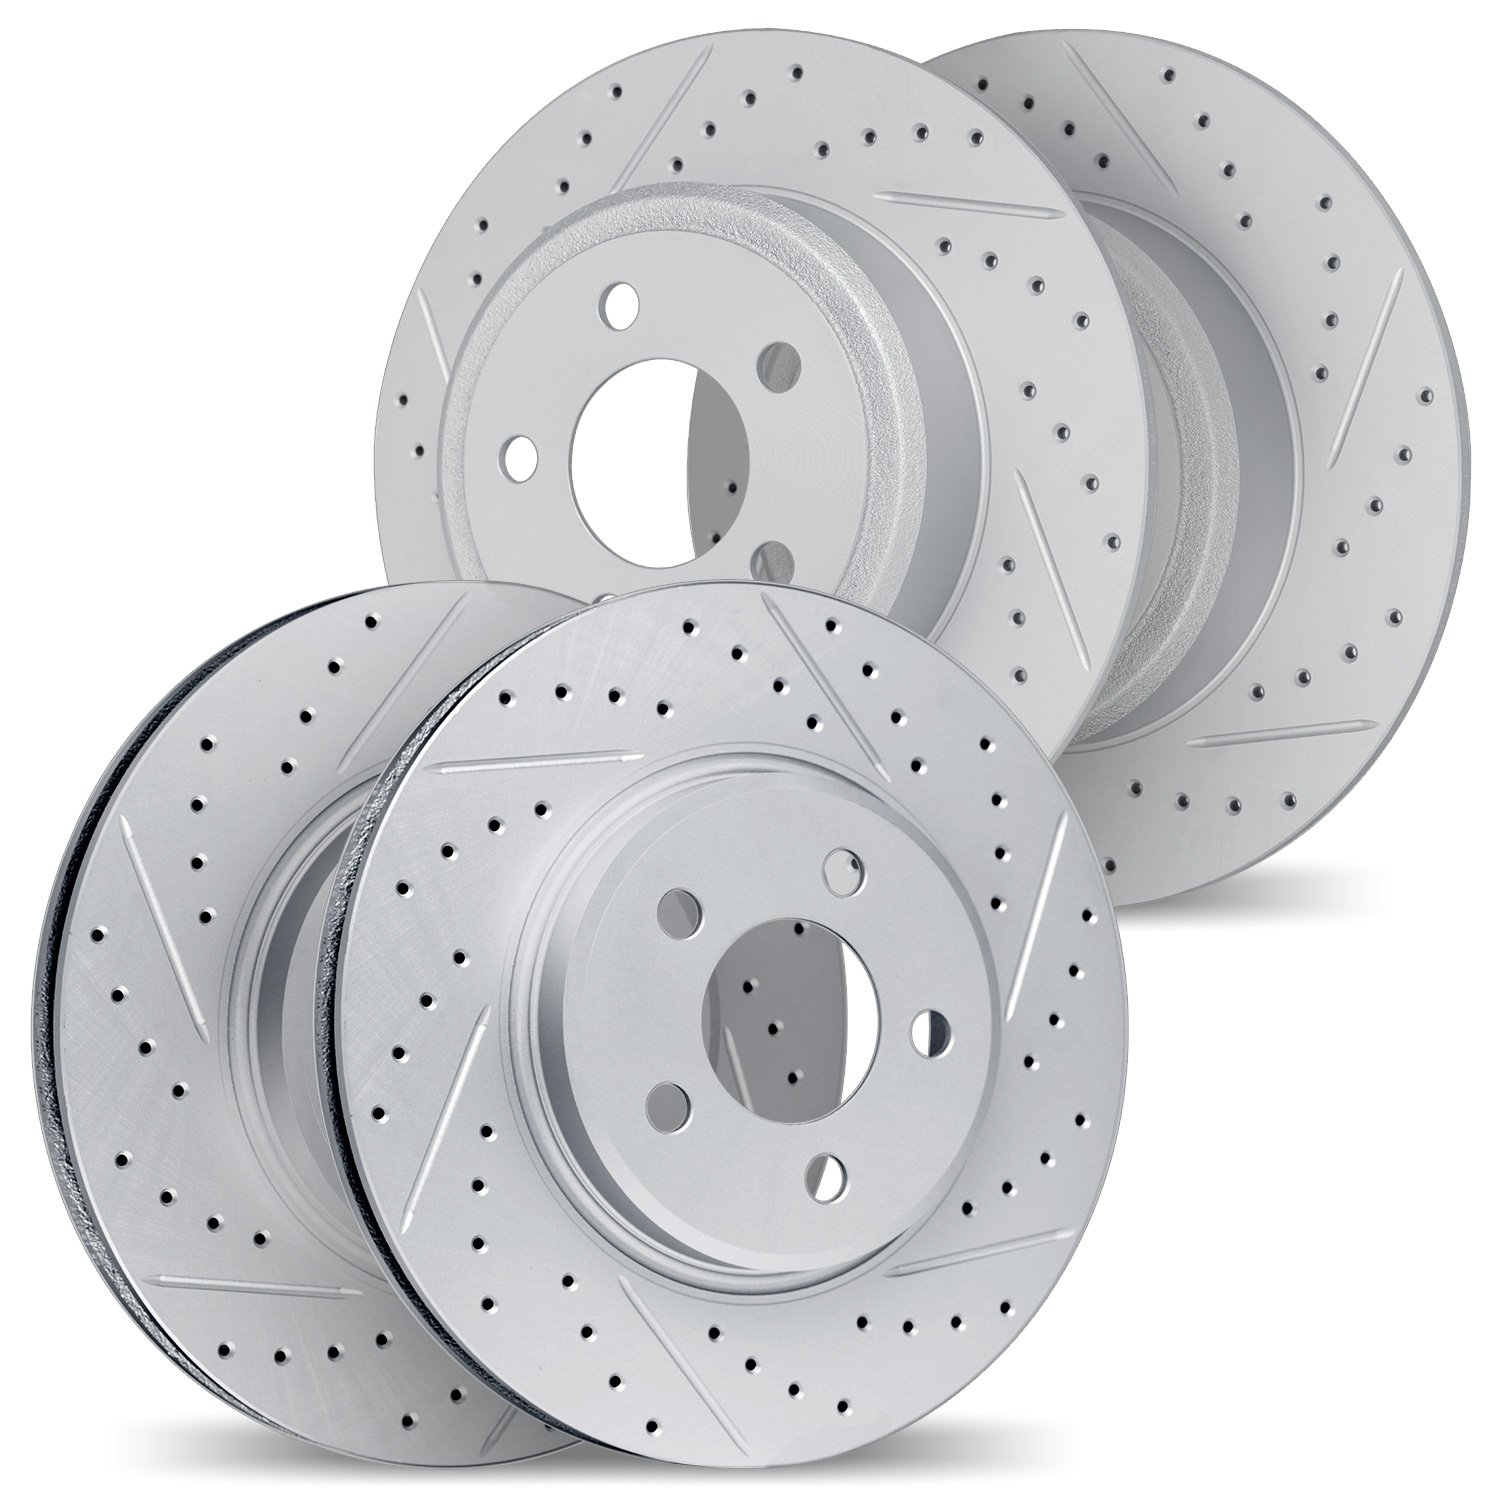 2004-42002 Geoperformance Drilled/Slotted Brake Rotors, Fits Select Mopar, Position: Front and Rear